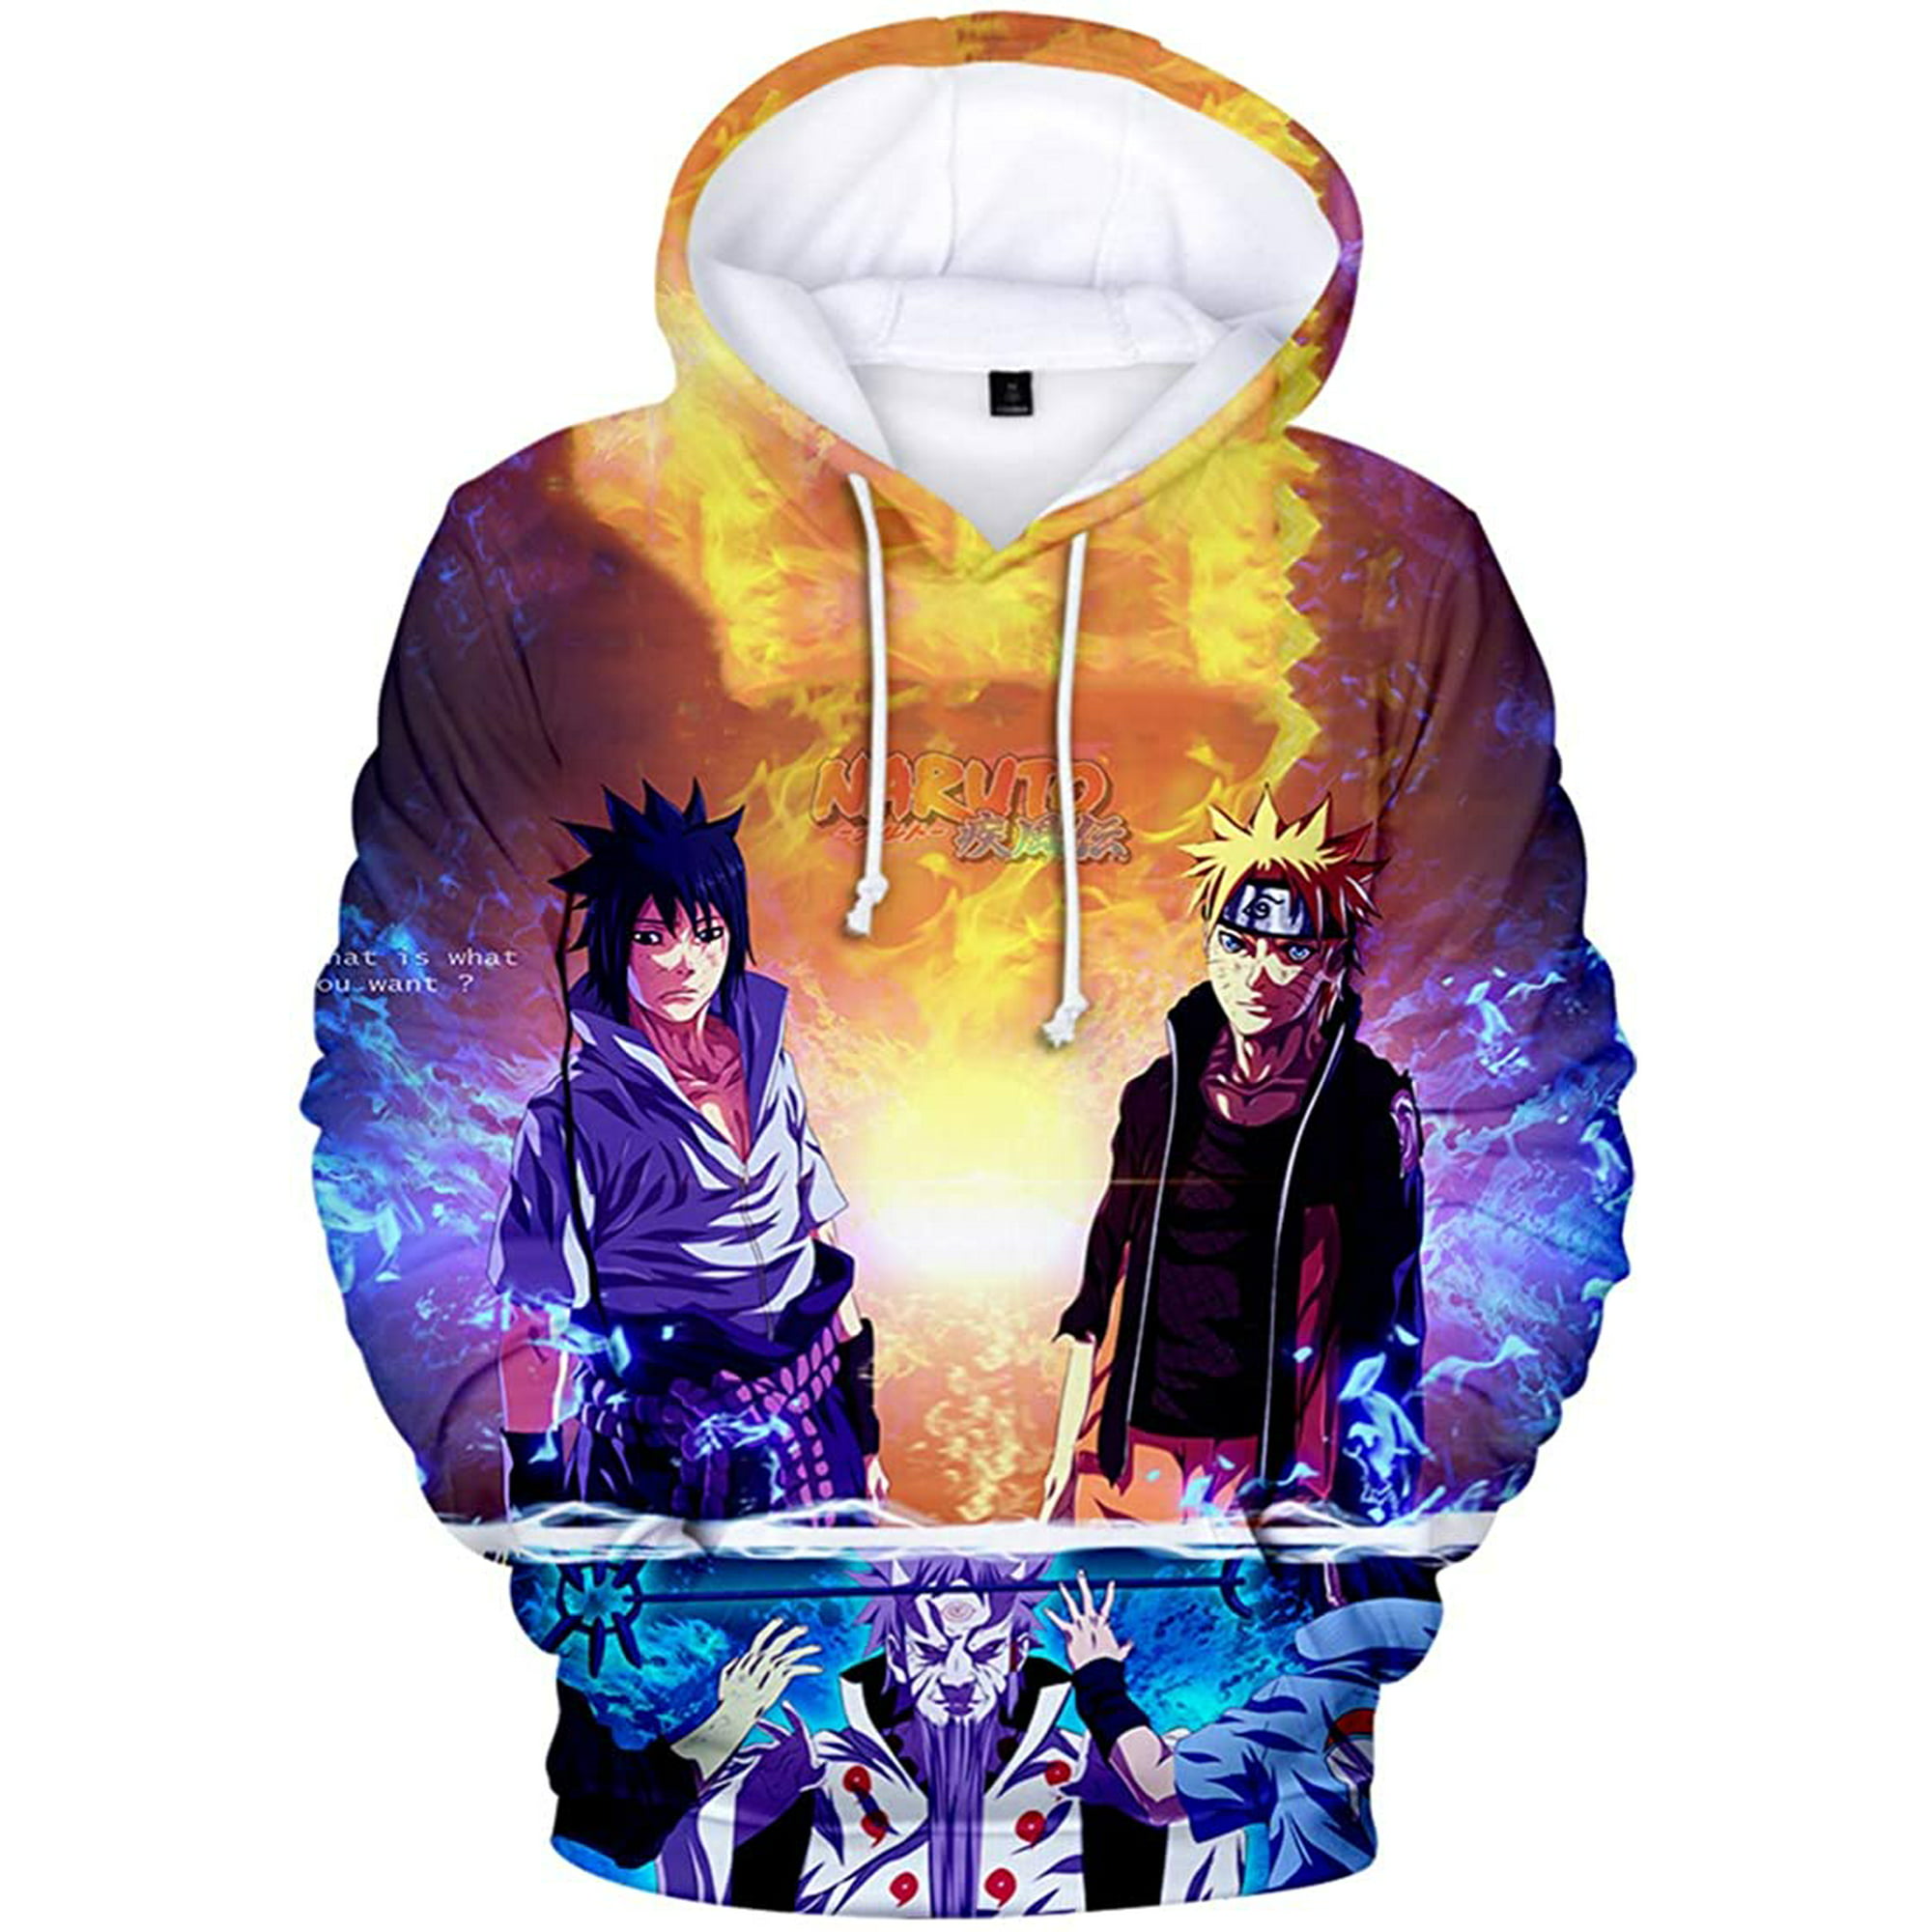 bettydom Novelty Hoodies Sweatshirt Outerwear with The Japanese Anime Naruto for Men Women